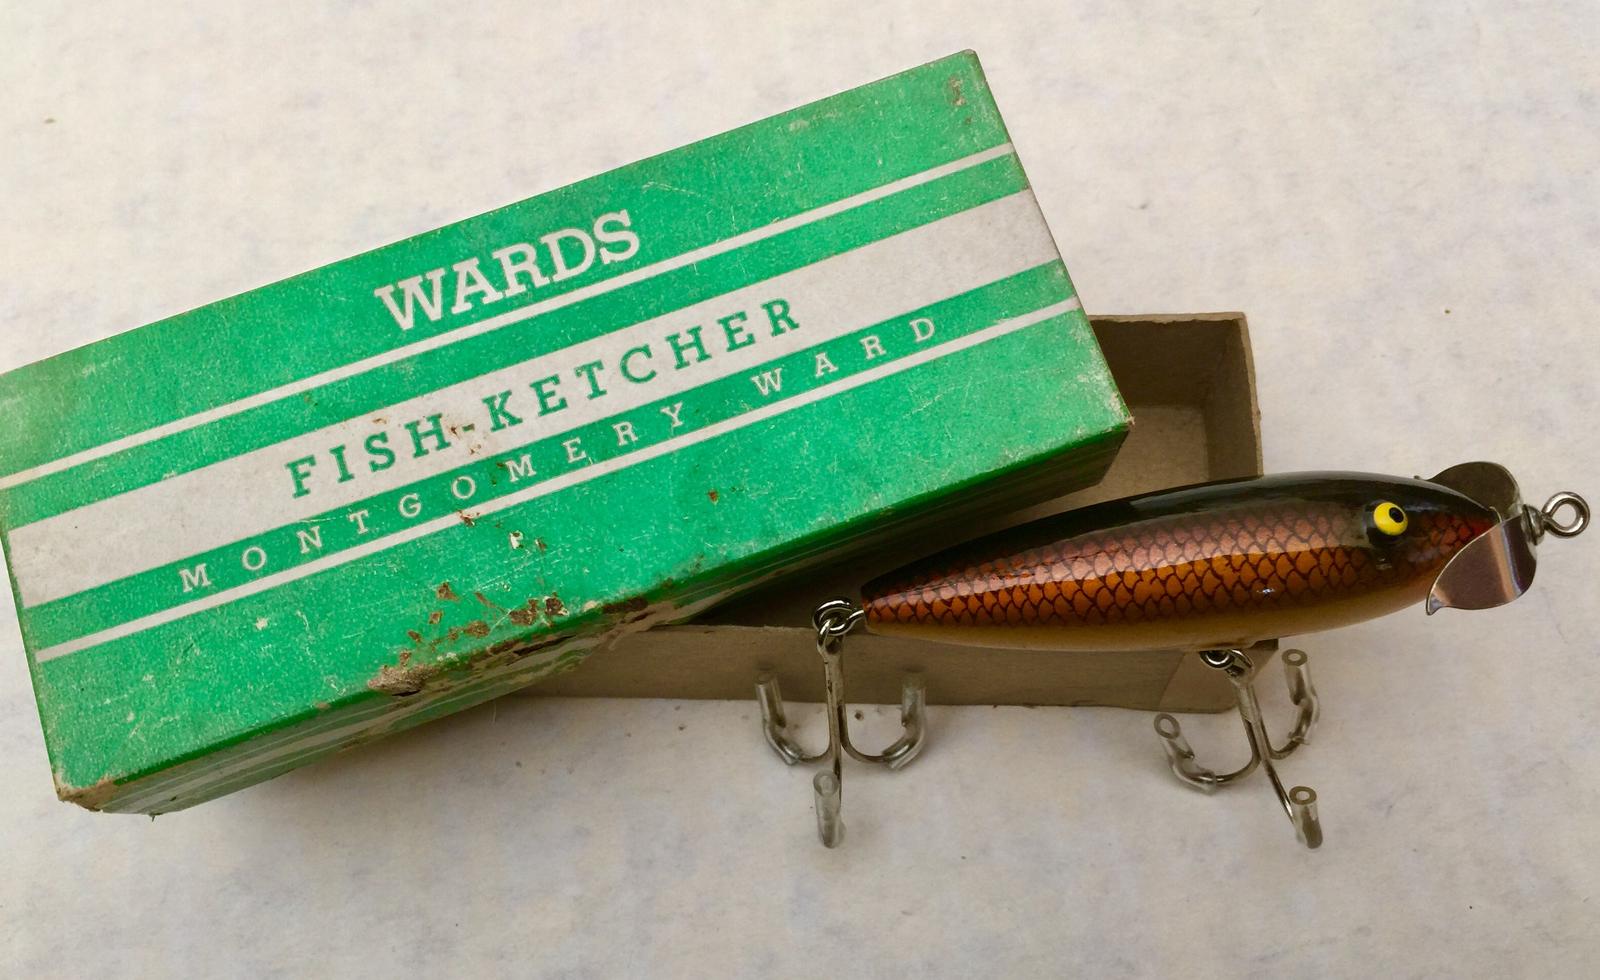 Wards Fish Ketcher,model 7958,with early box